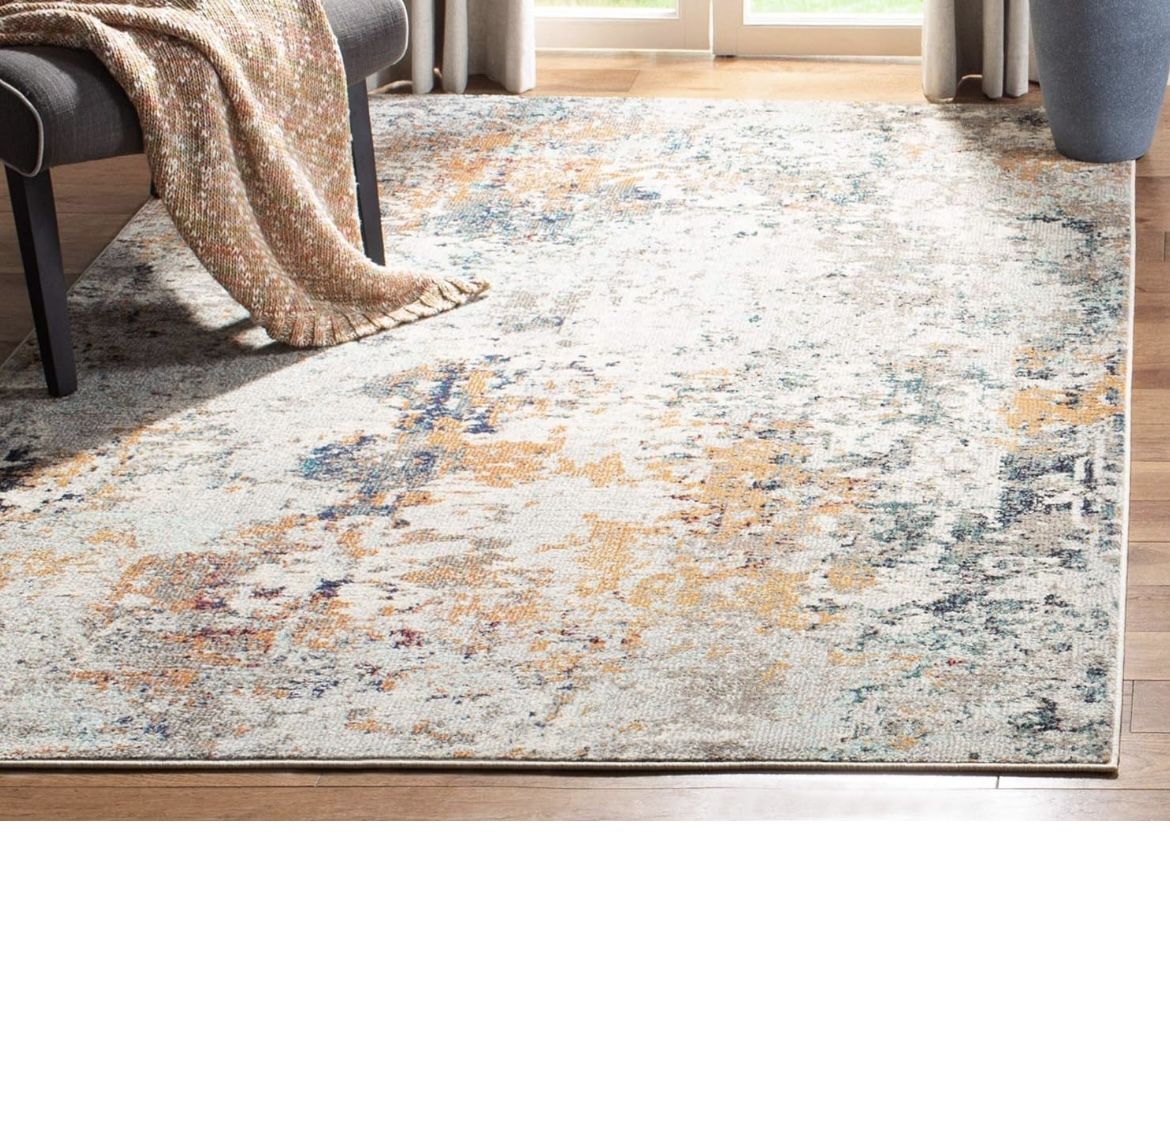 SAFAVIEH Madison Collection Accent Rug - 4' x 6', Grey & Beige, Modern Abstract Design, Non-Shedding & Easy Care, Ideal for High Traffic Areas in Entr